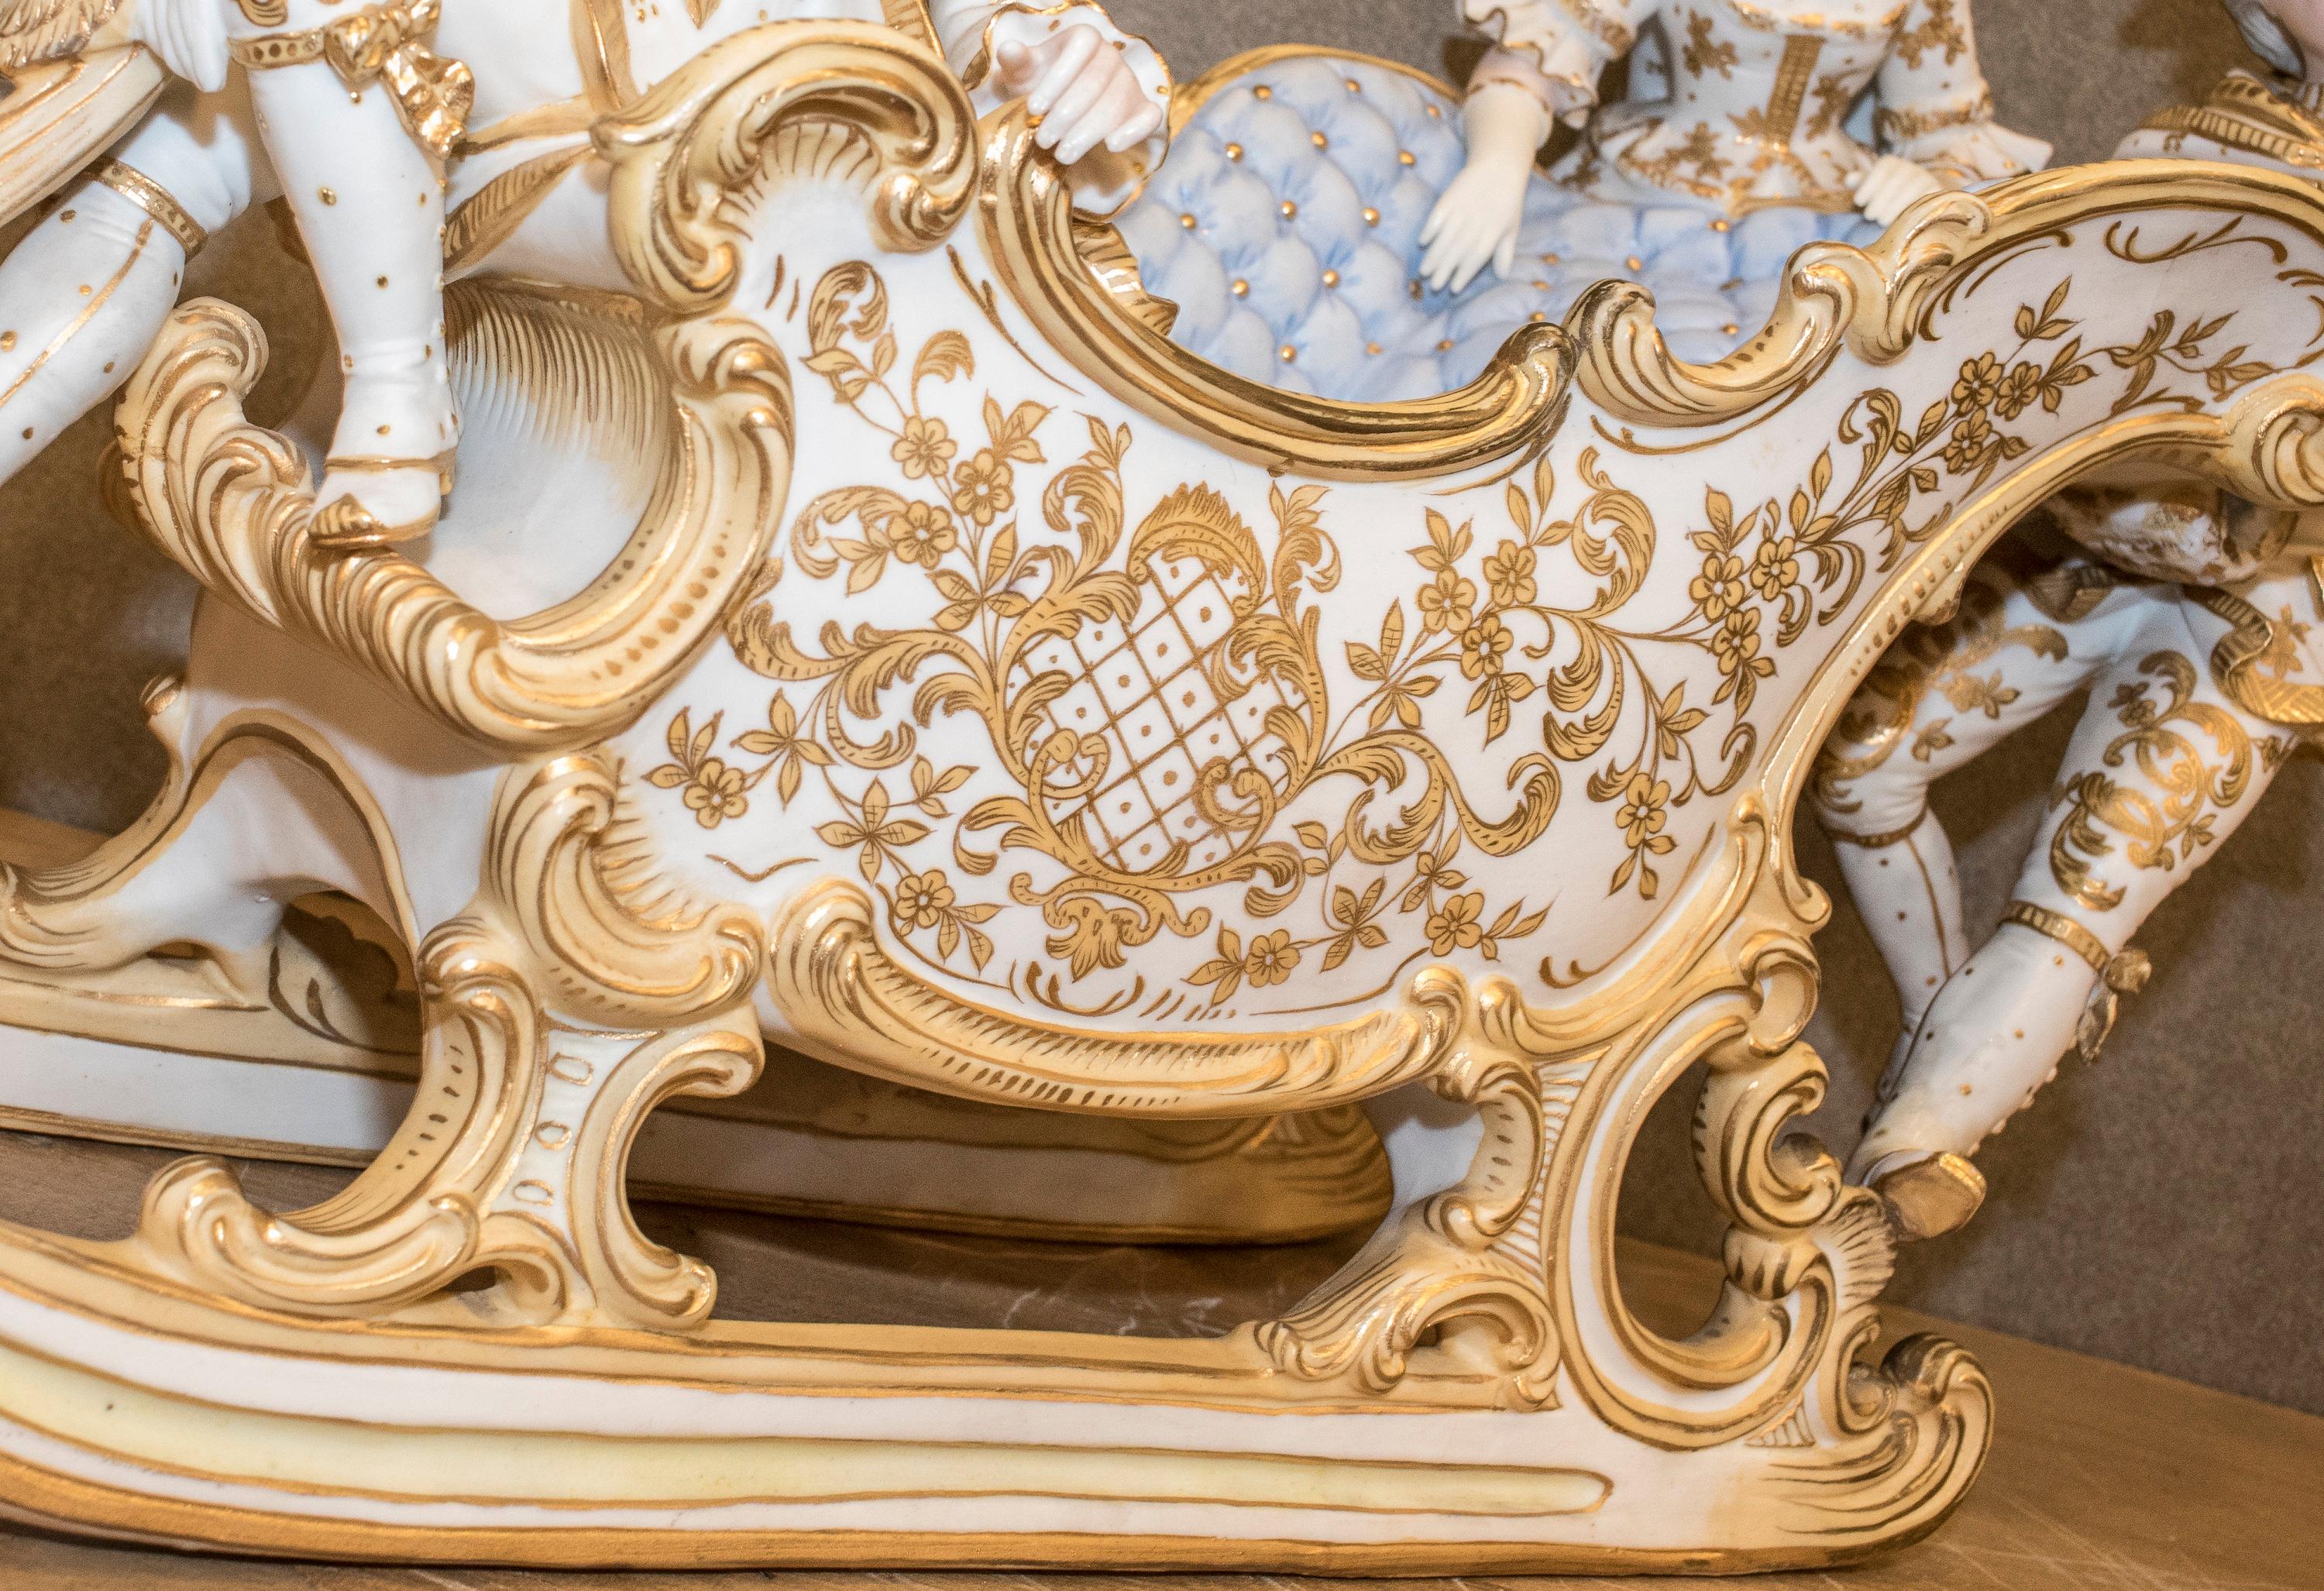 One of a kind 19th century, circa 1840 polychrome and golded central porcelain, probably
German or Austrian, baroque sleigh .With marks in the base and written the date in the base too.
Stunning piece with a very fine job. In an excellent